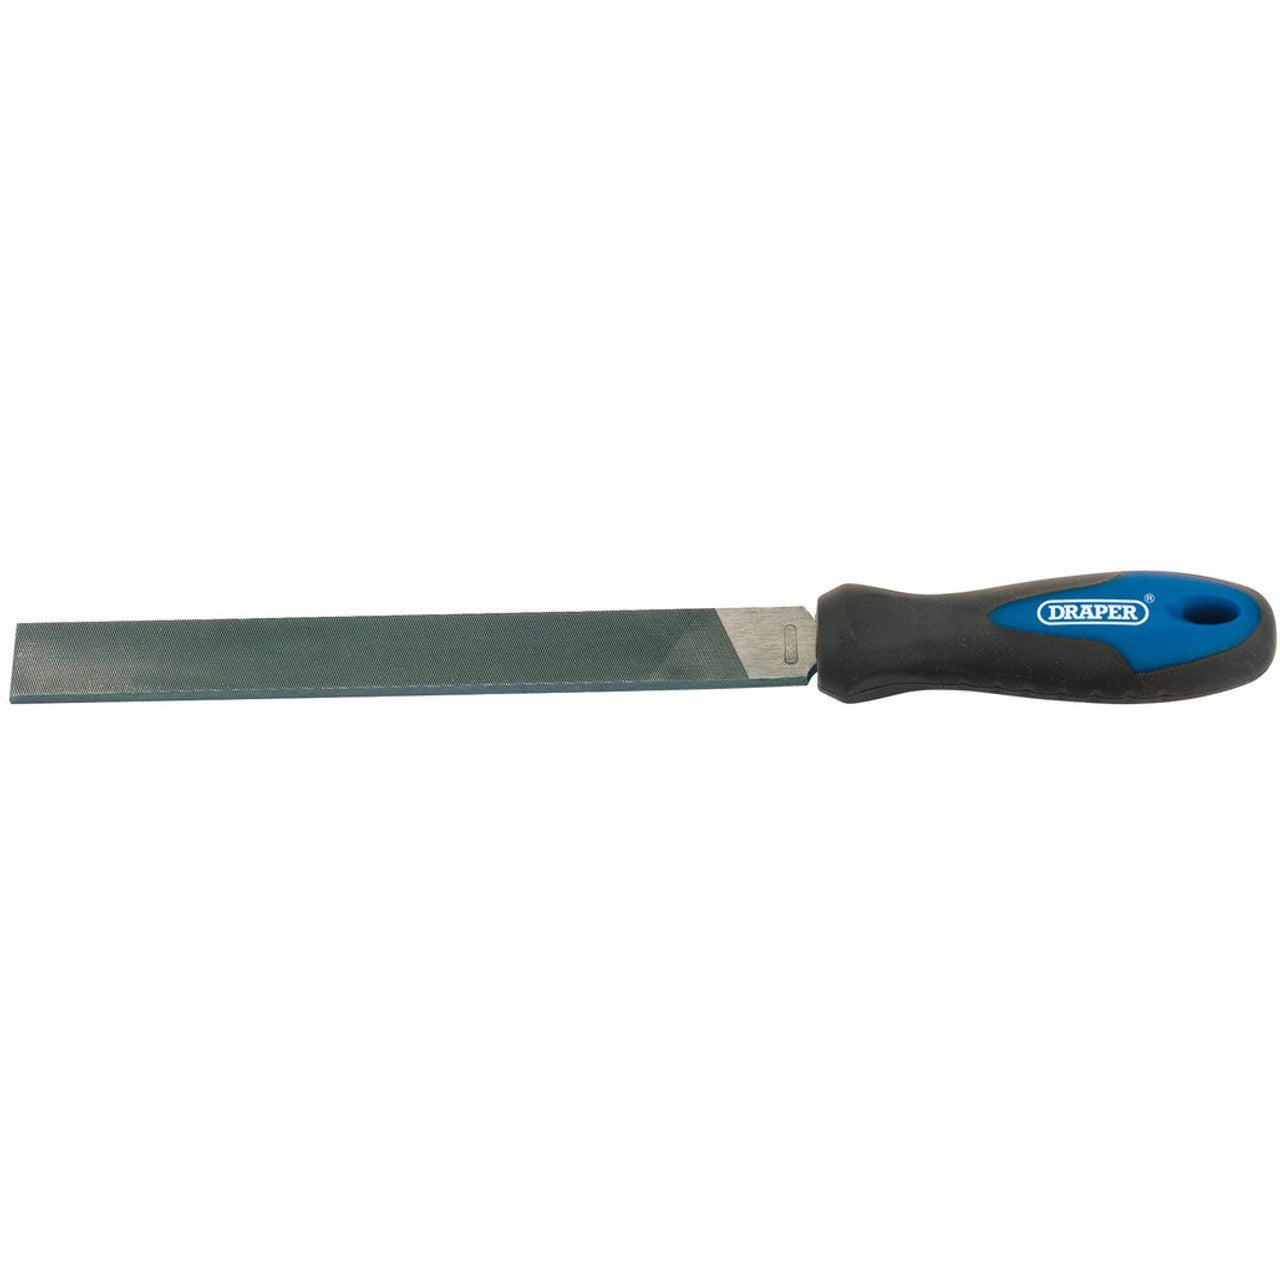 Draper 44953 Soft Grip Engineer's Hand File and Handle, 200mm